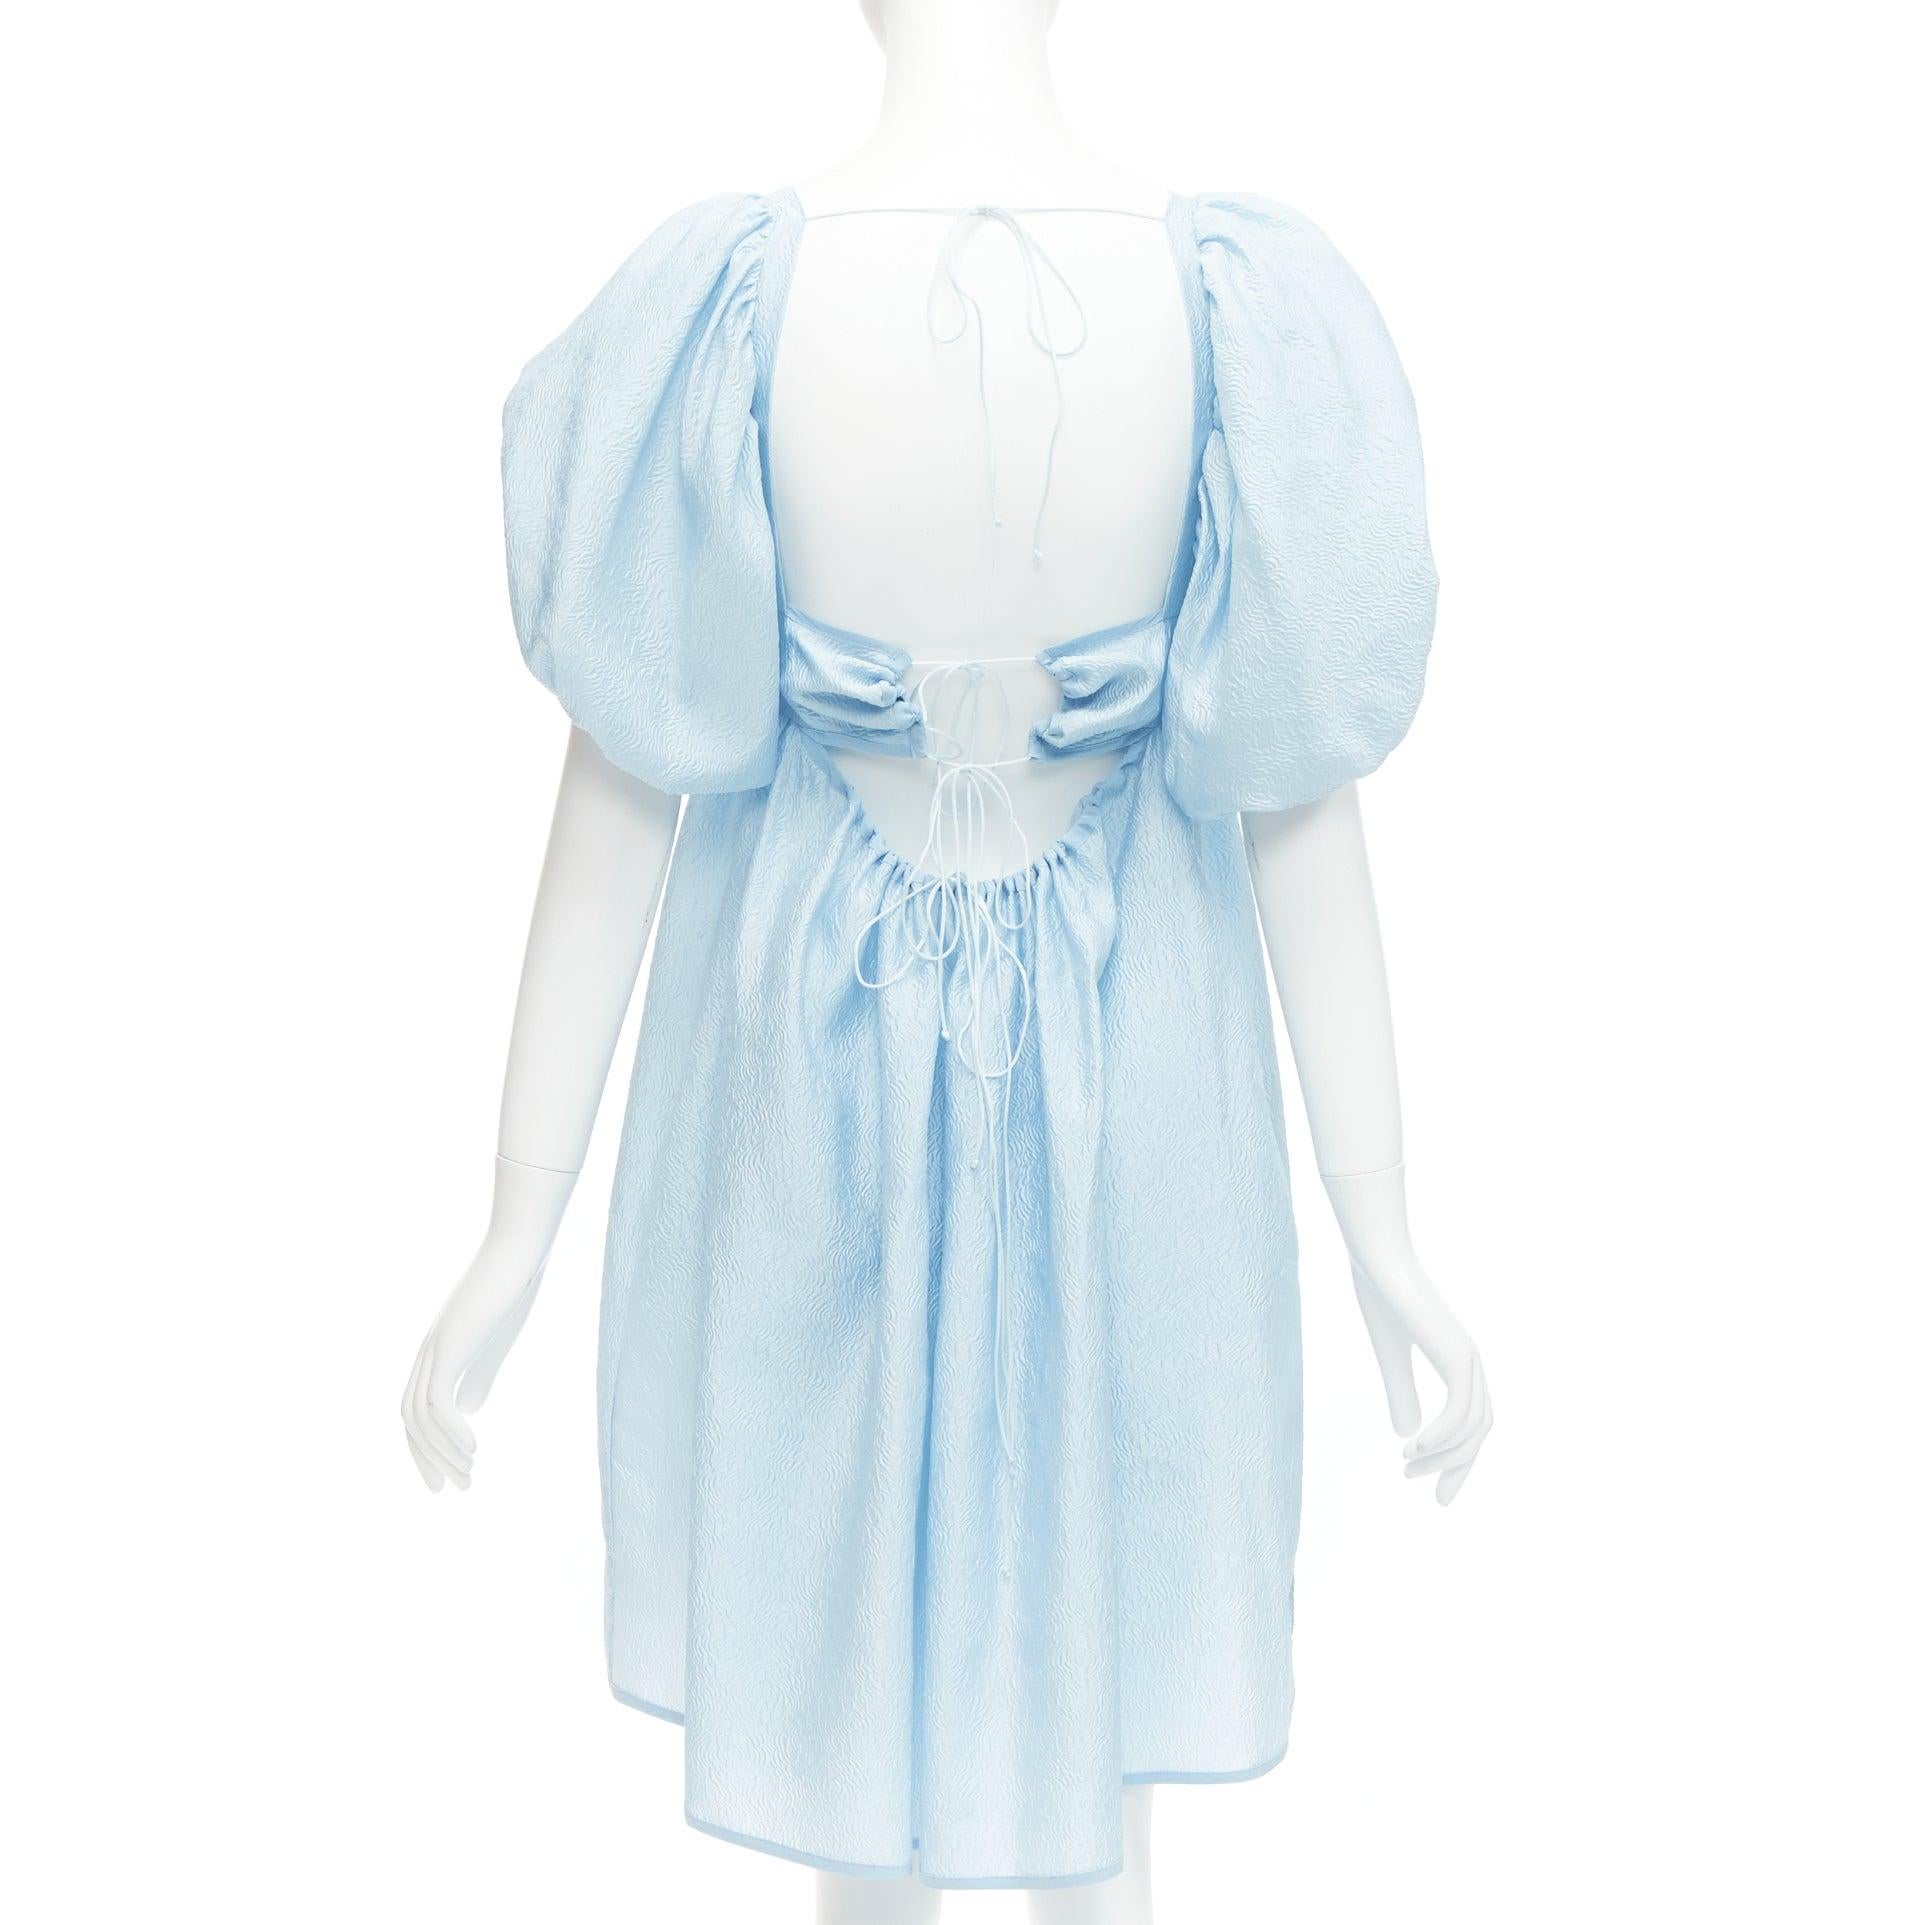 CECILIE BAHNSEN blue silk blend rose silk jacquard puff babydoll dress UK6 XS
Reference: LNKO/A02267
Brand: Cecilie Bahnsen
Material: Silk, Blend
Color: Blue
Pattern: Floral
Closure: Self Tie
Lining: Blue Silk
Extra Details: Back cut outs with